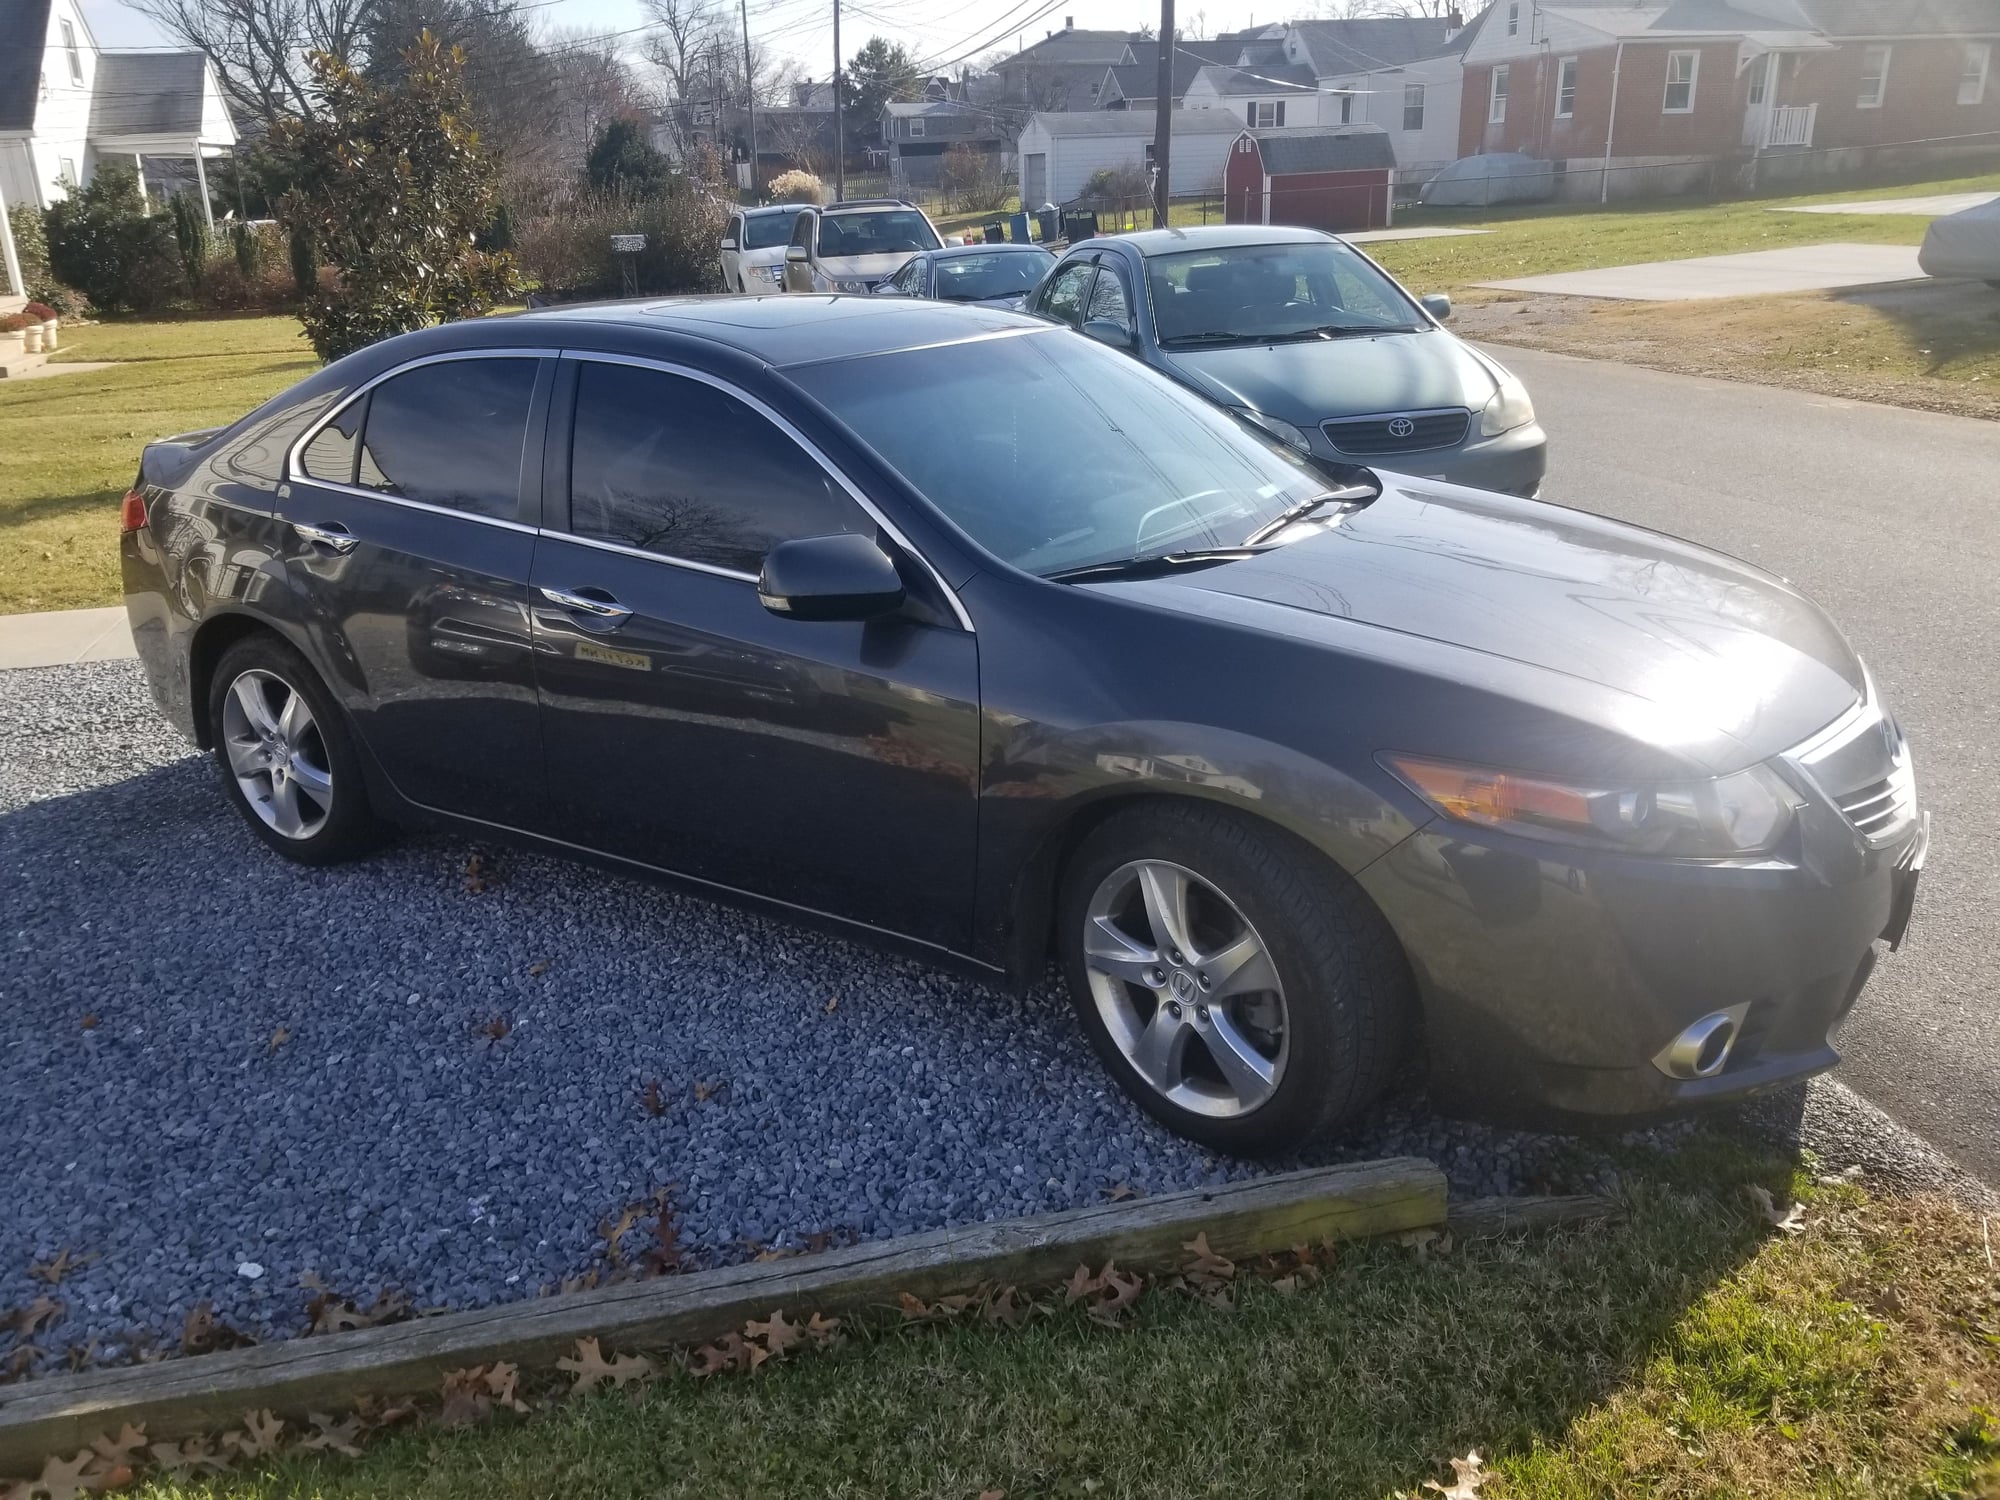 2013 Acura TSX - FS: TSX 2013 with 99K Miles - Used - VIN JH4CU2F66DC002928 - 98,500 Miles - 4 cyl - 2WD - Automatic - Sedan - Gray - Kearny, NJ 07032, United States